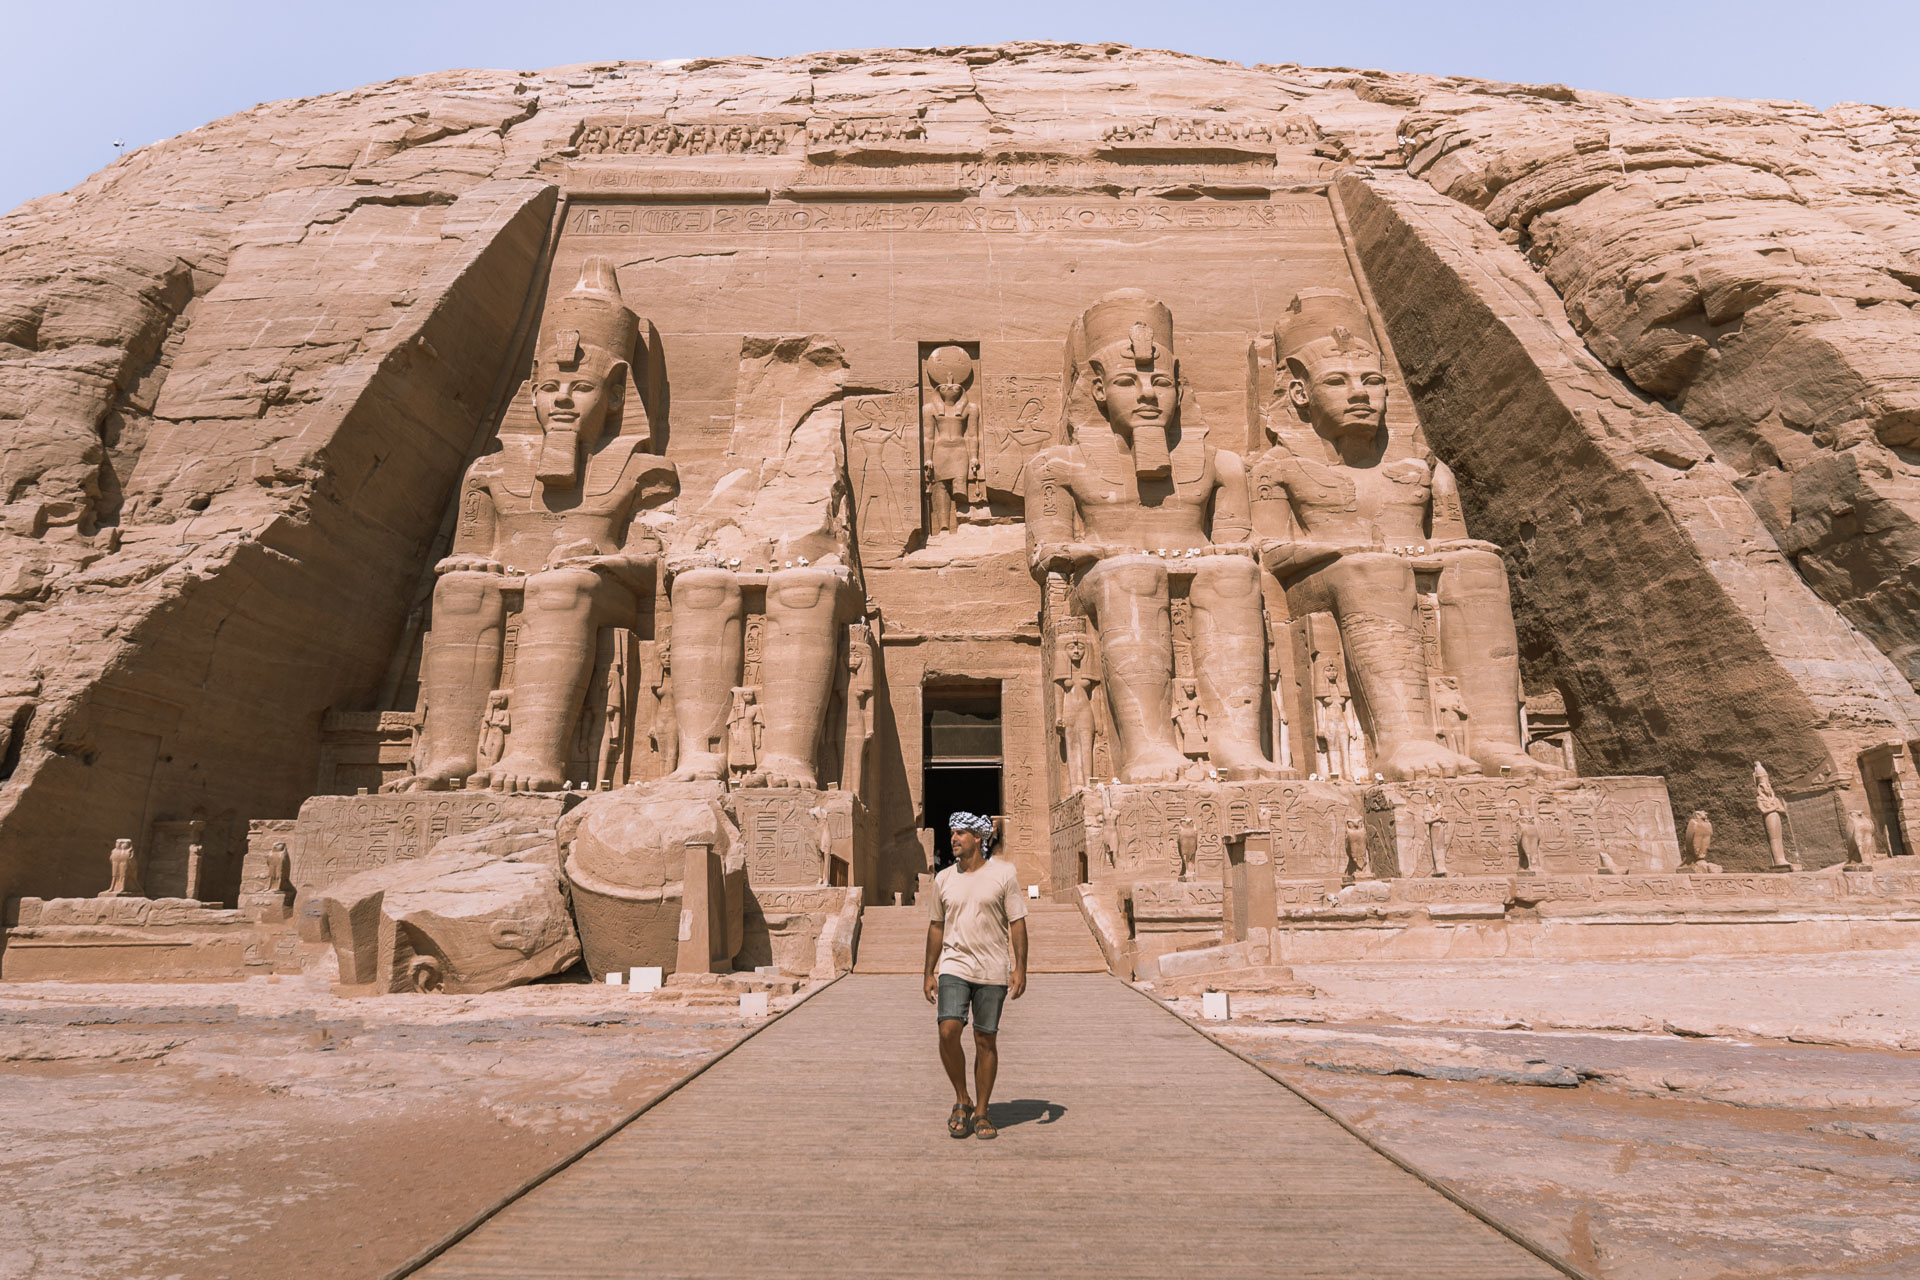 FROM ASWAN TO ABU SIMBEL IN EGYPT